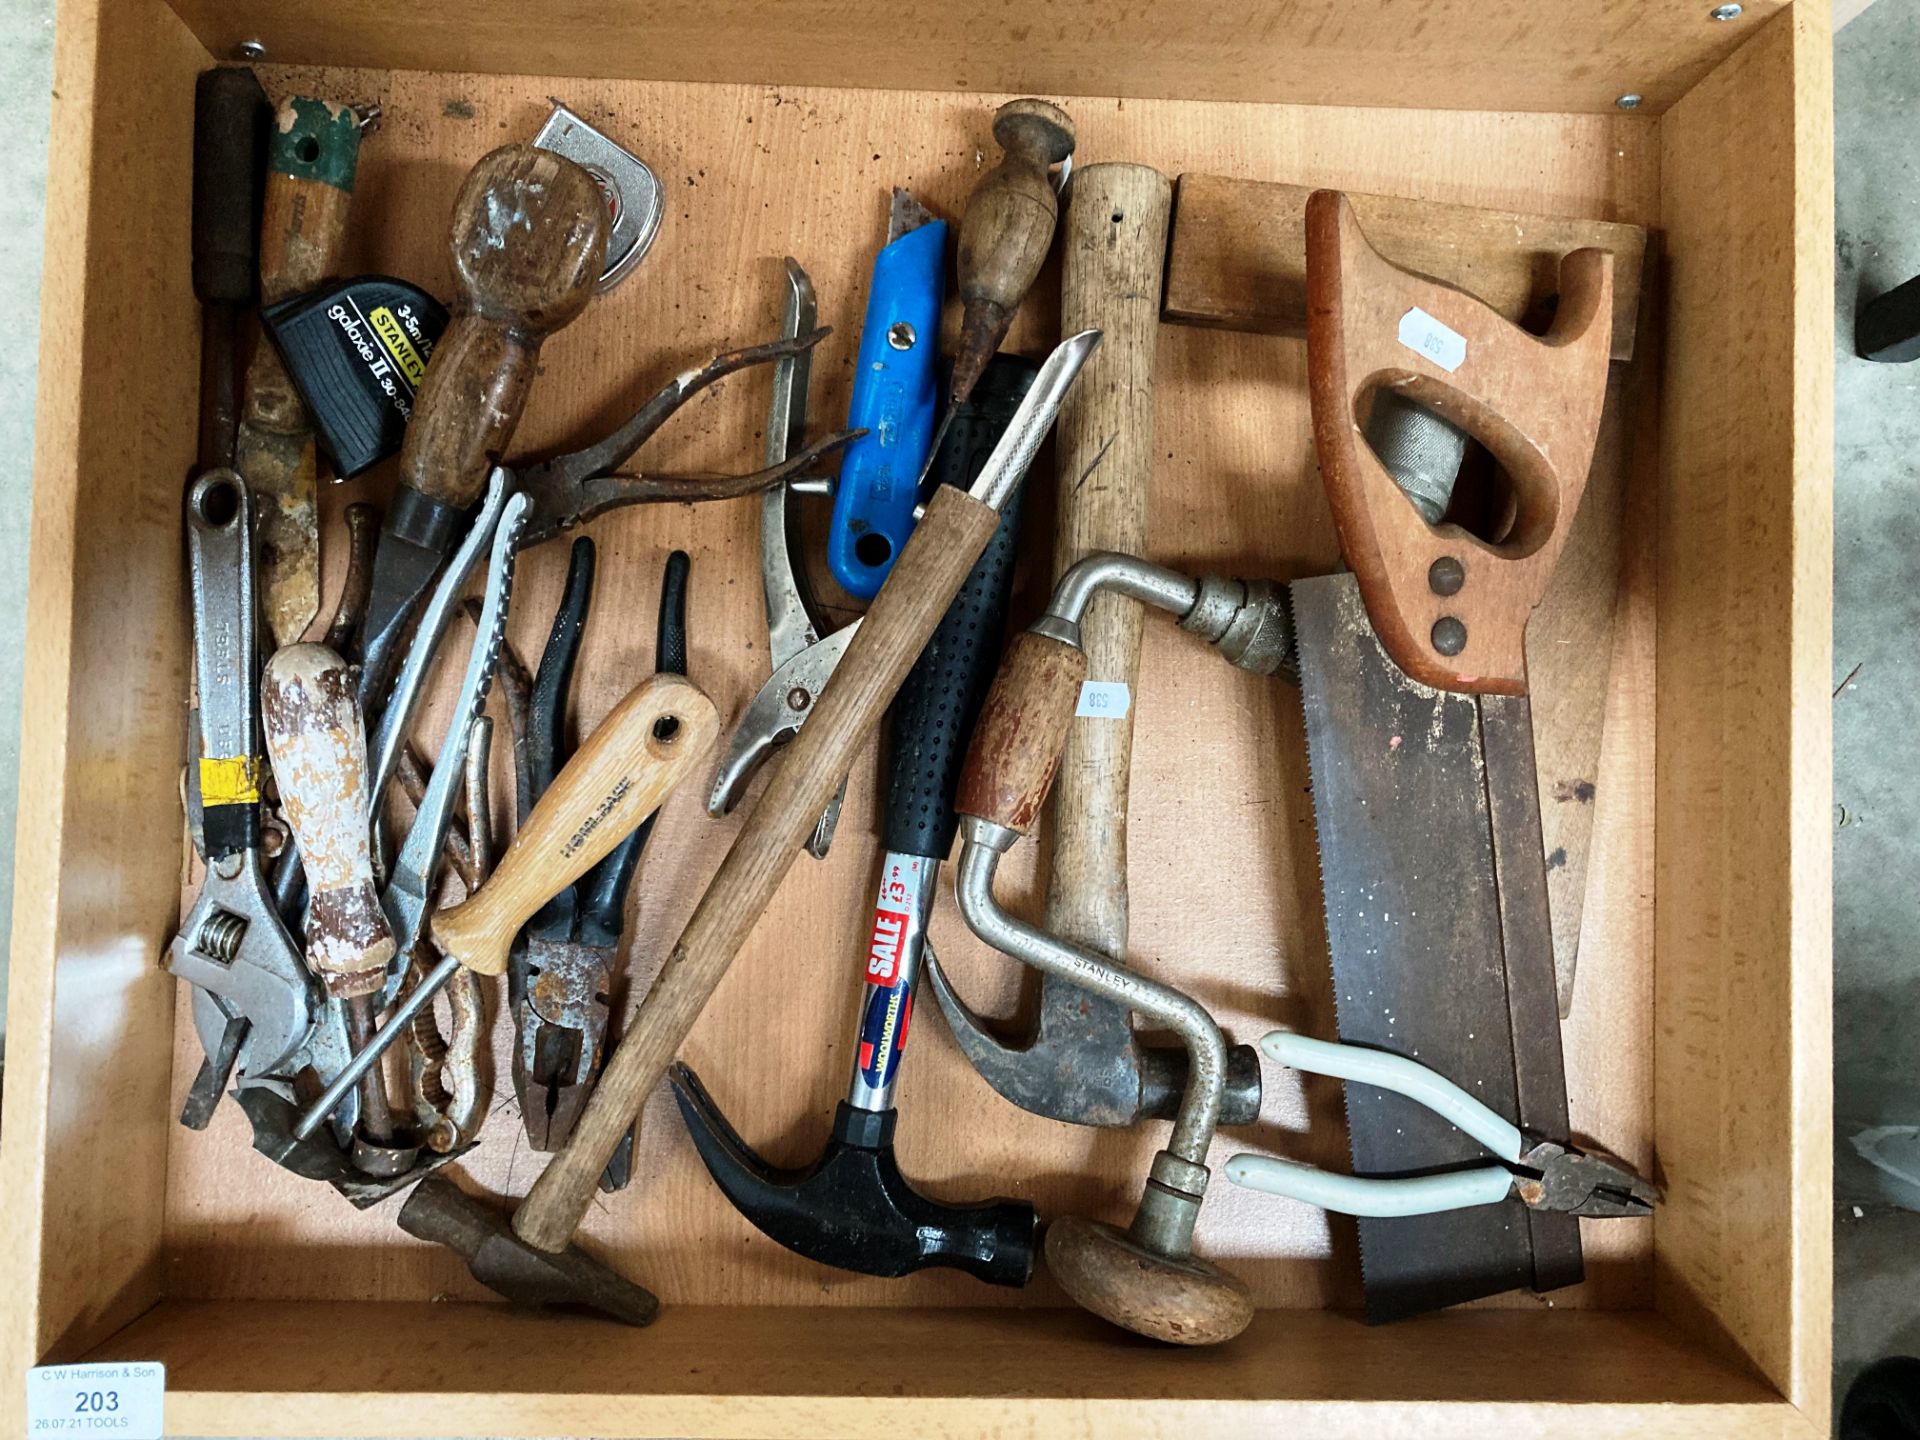 Contents to drawer - handsaw, hammers, pliers, adjustable wrench,